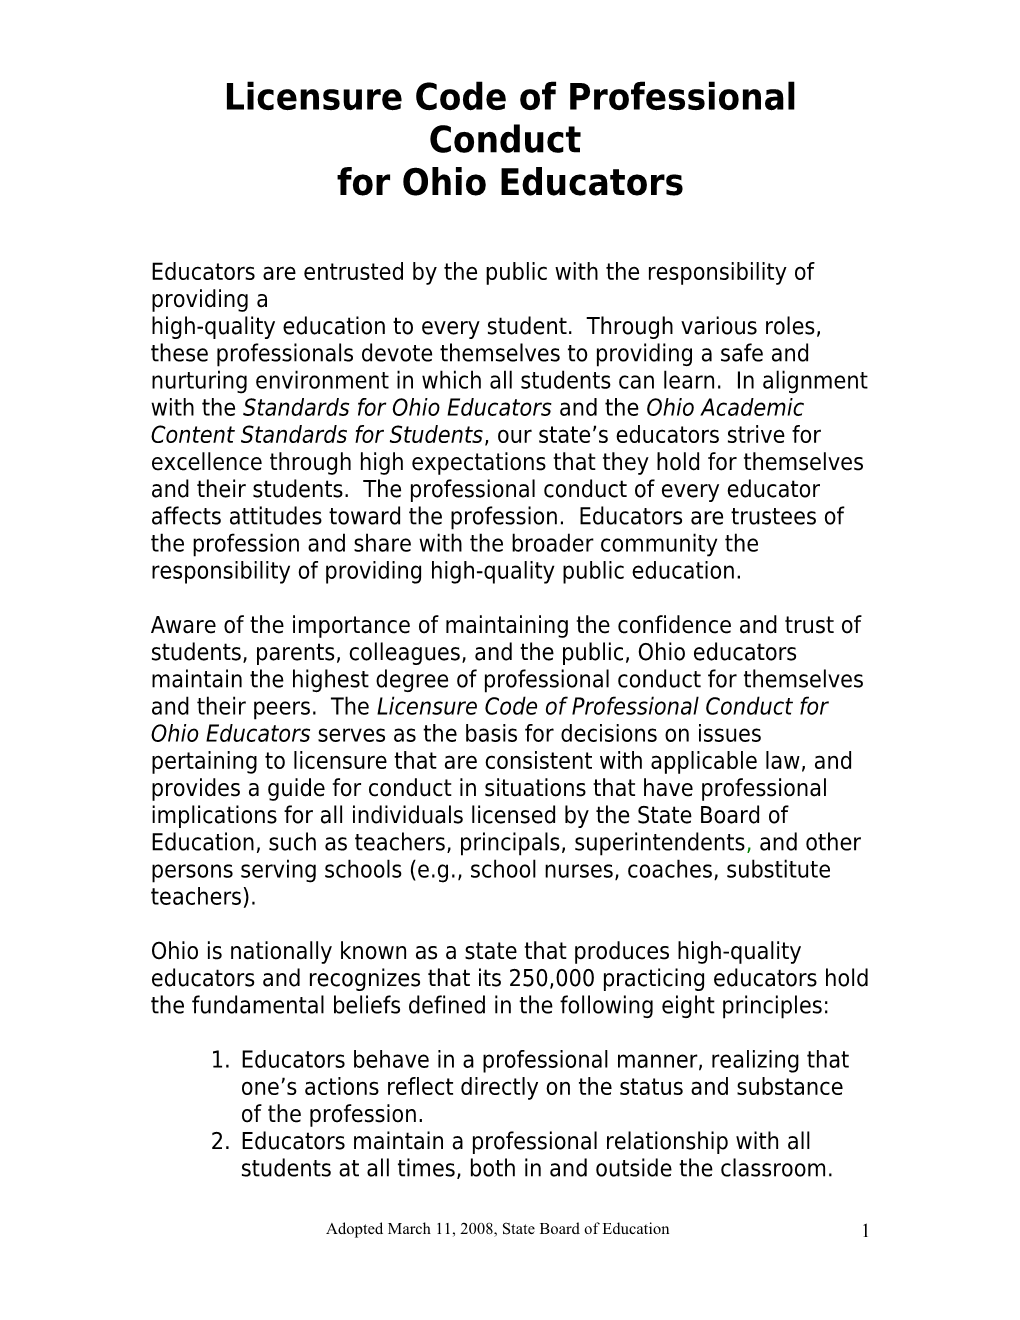 Draft of the Principles of Professional Conduct for Ohio Educators